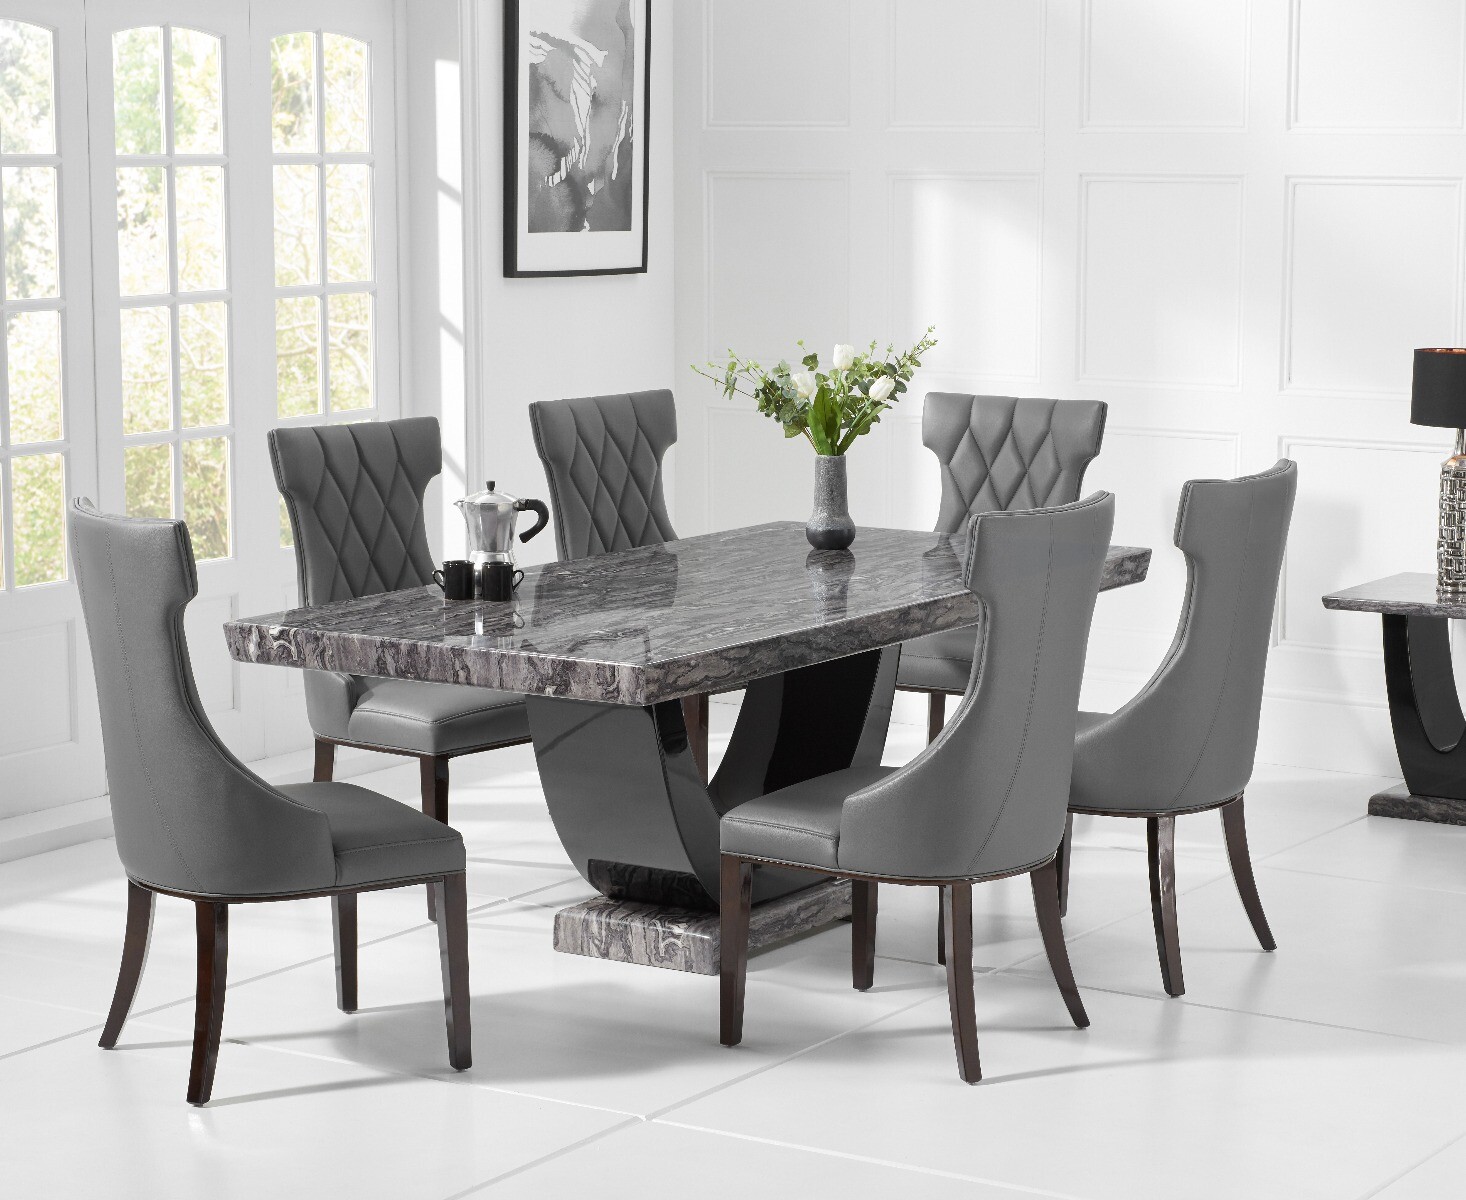 Photo 1 of Raphael 170cm dark grey pedestal marble dining table with 6 cream sophia chairs